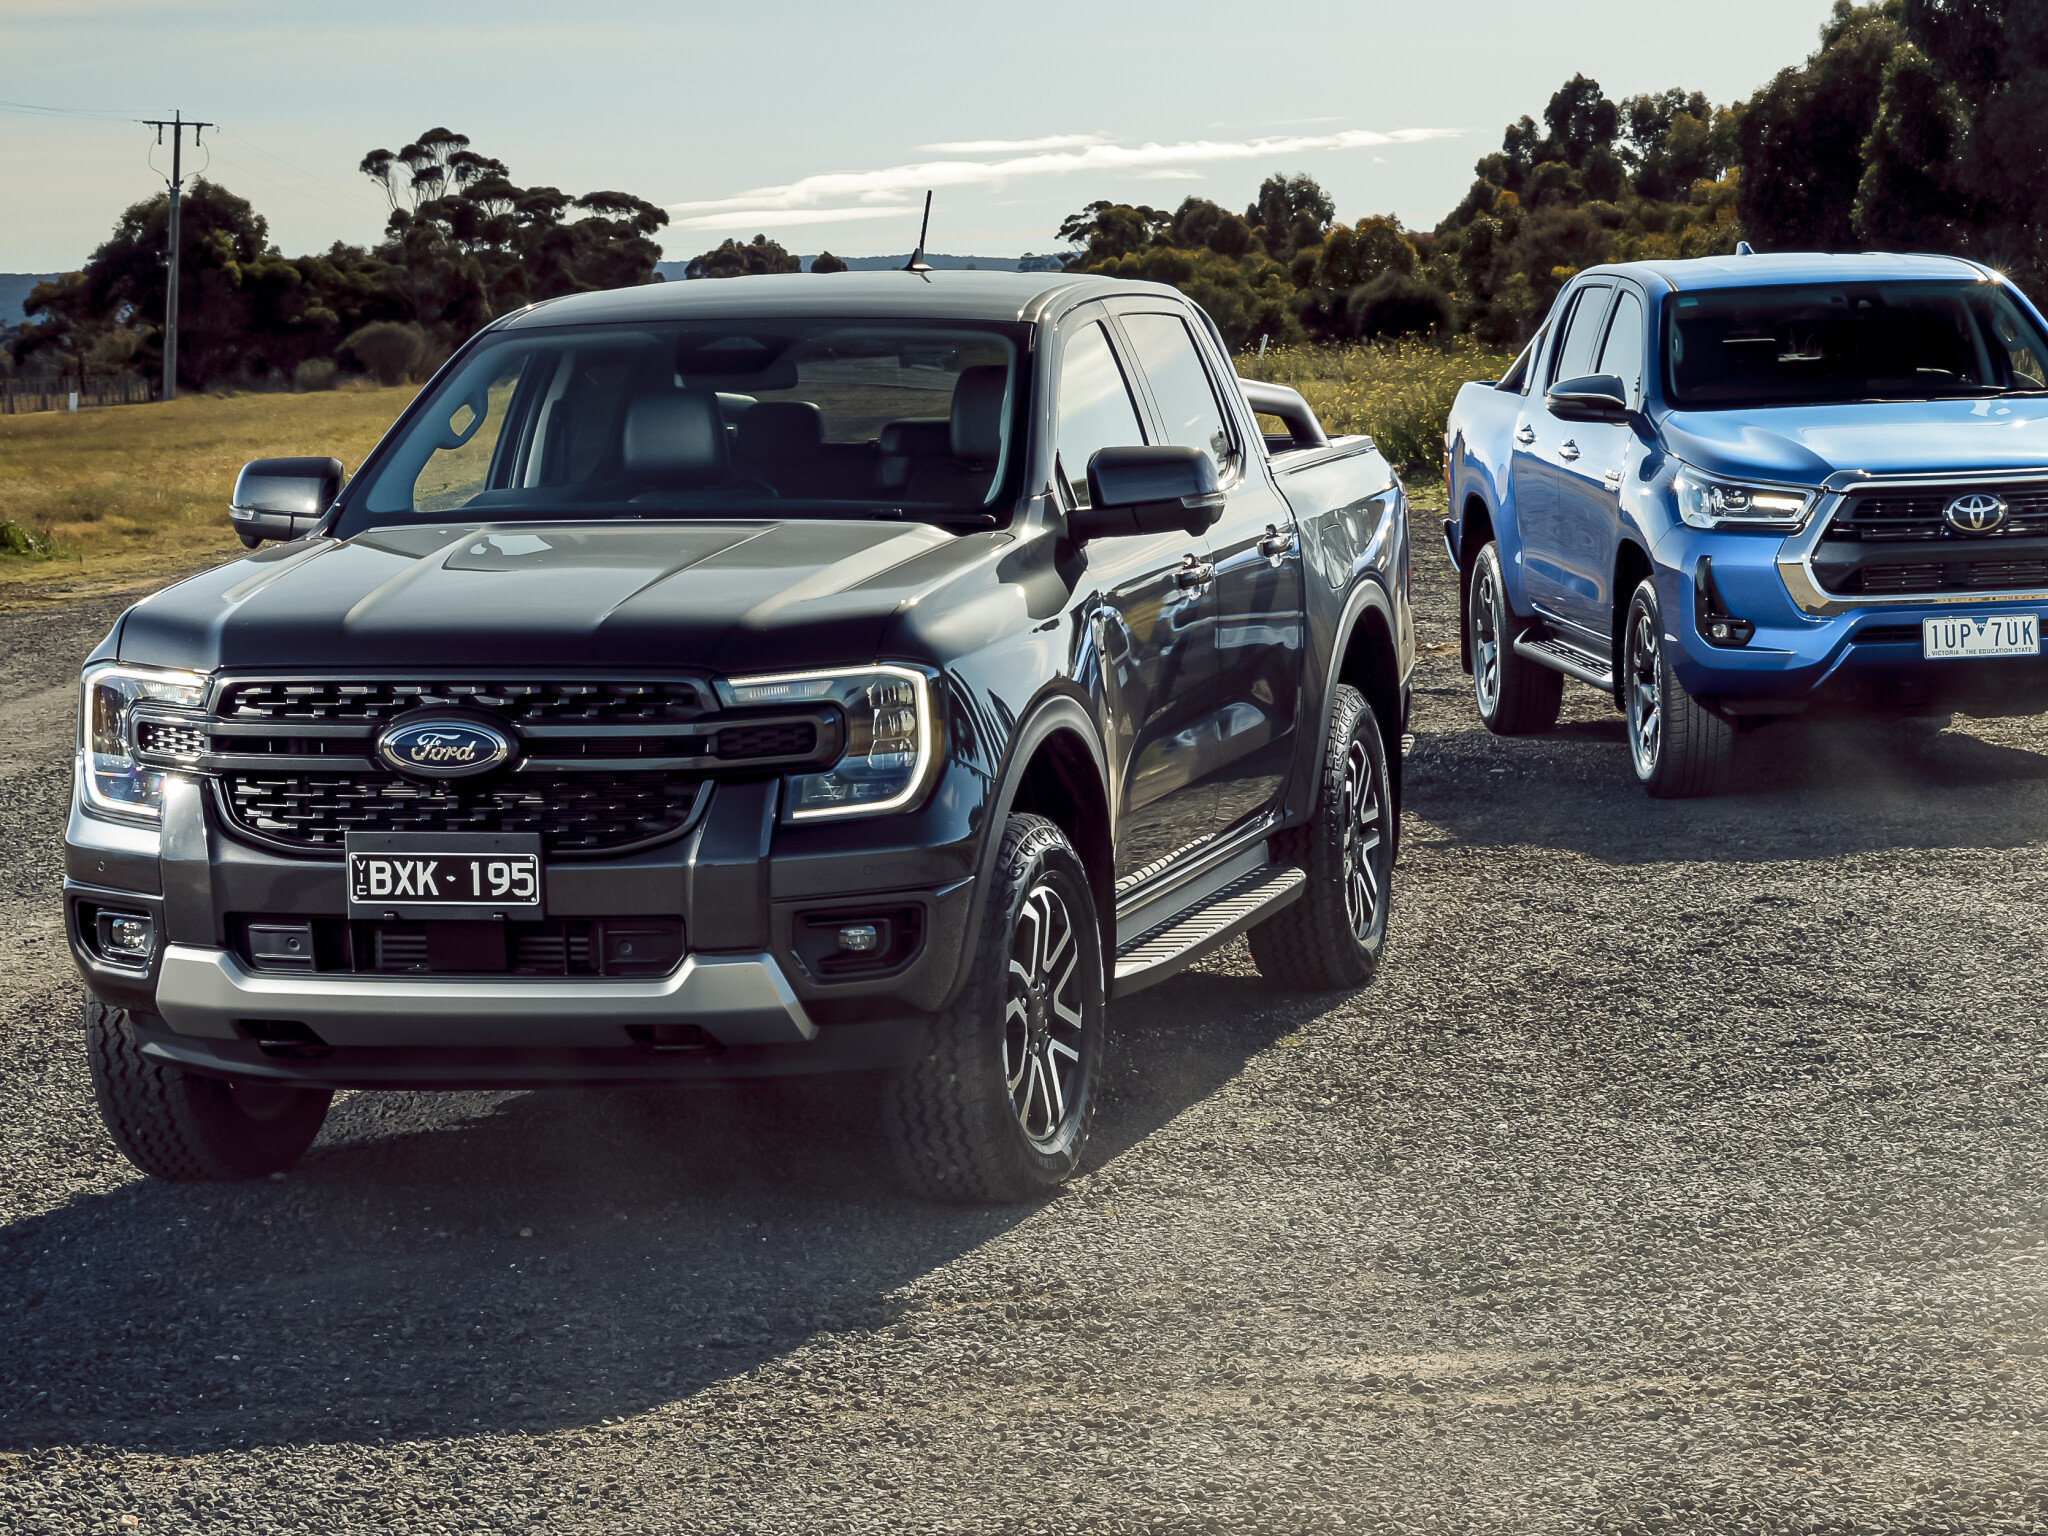 HIGH LUX WITH STYLE If you're a N70 Hilux fan? You'll surely know